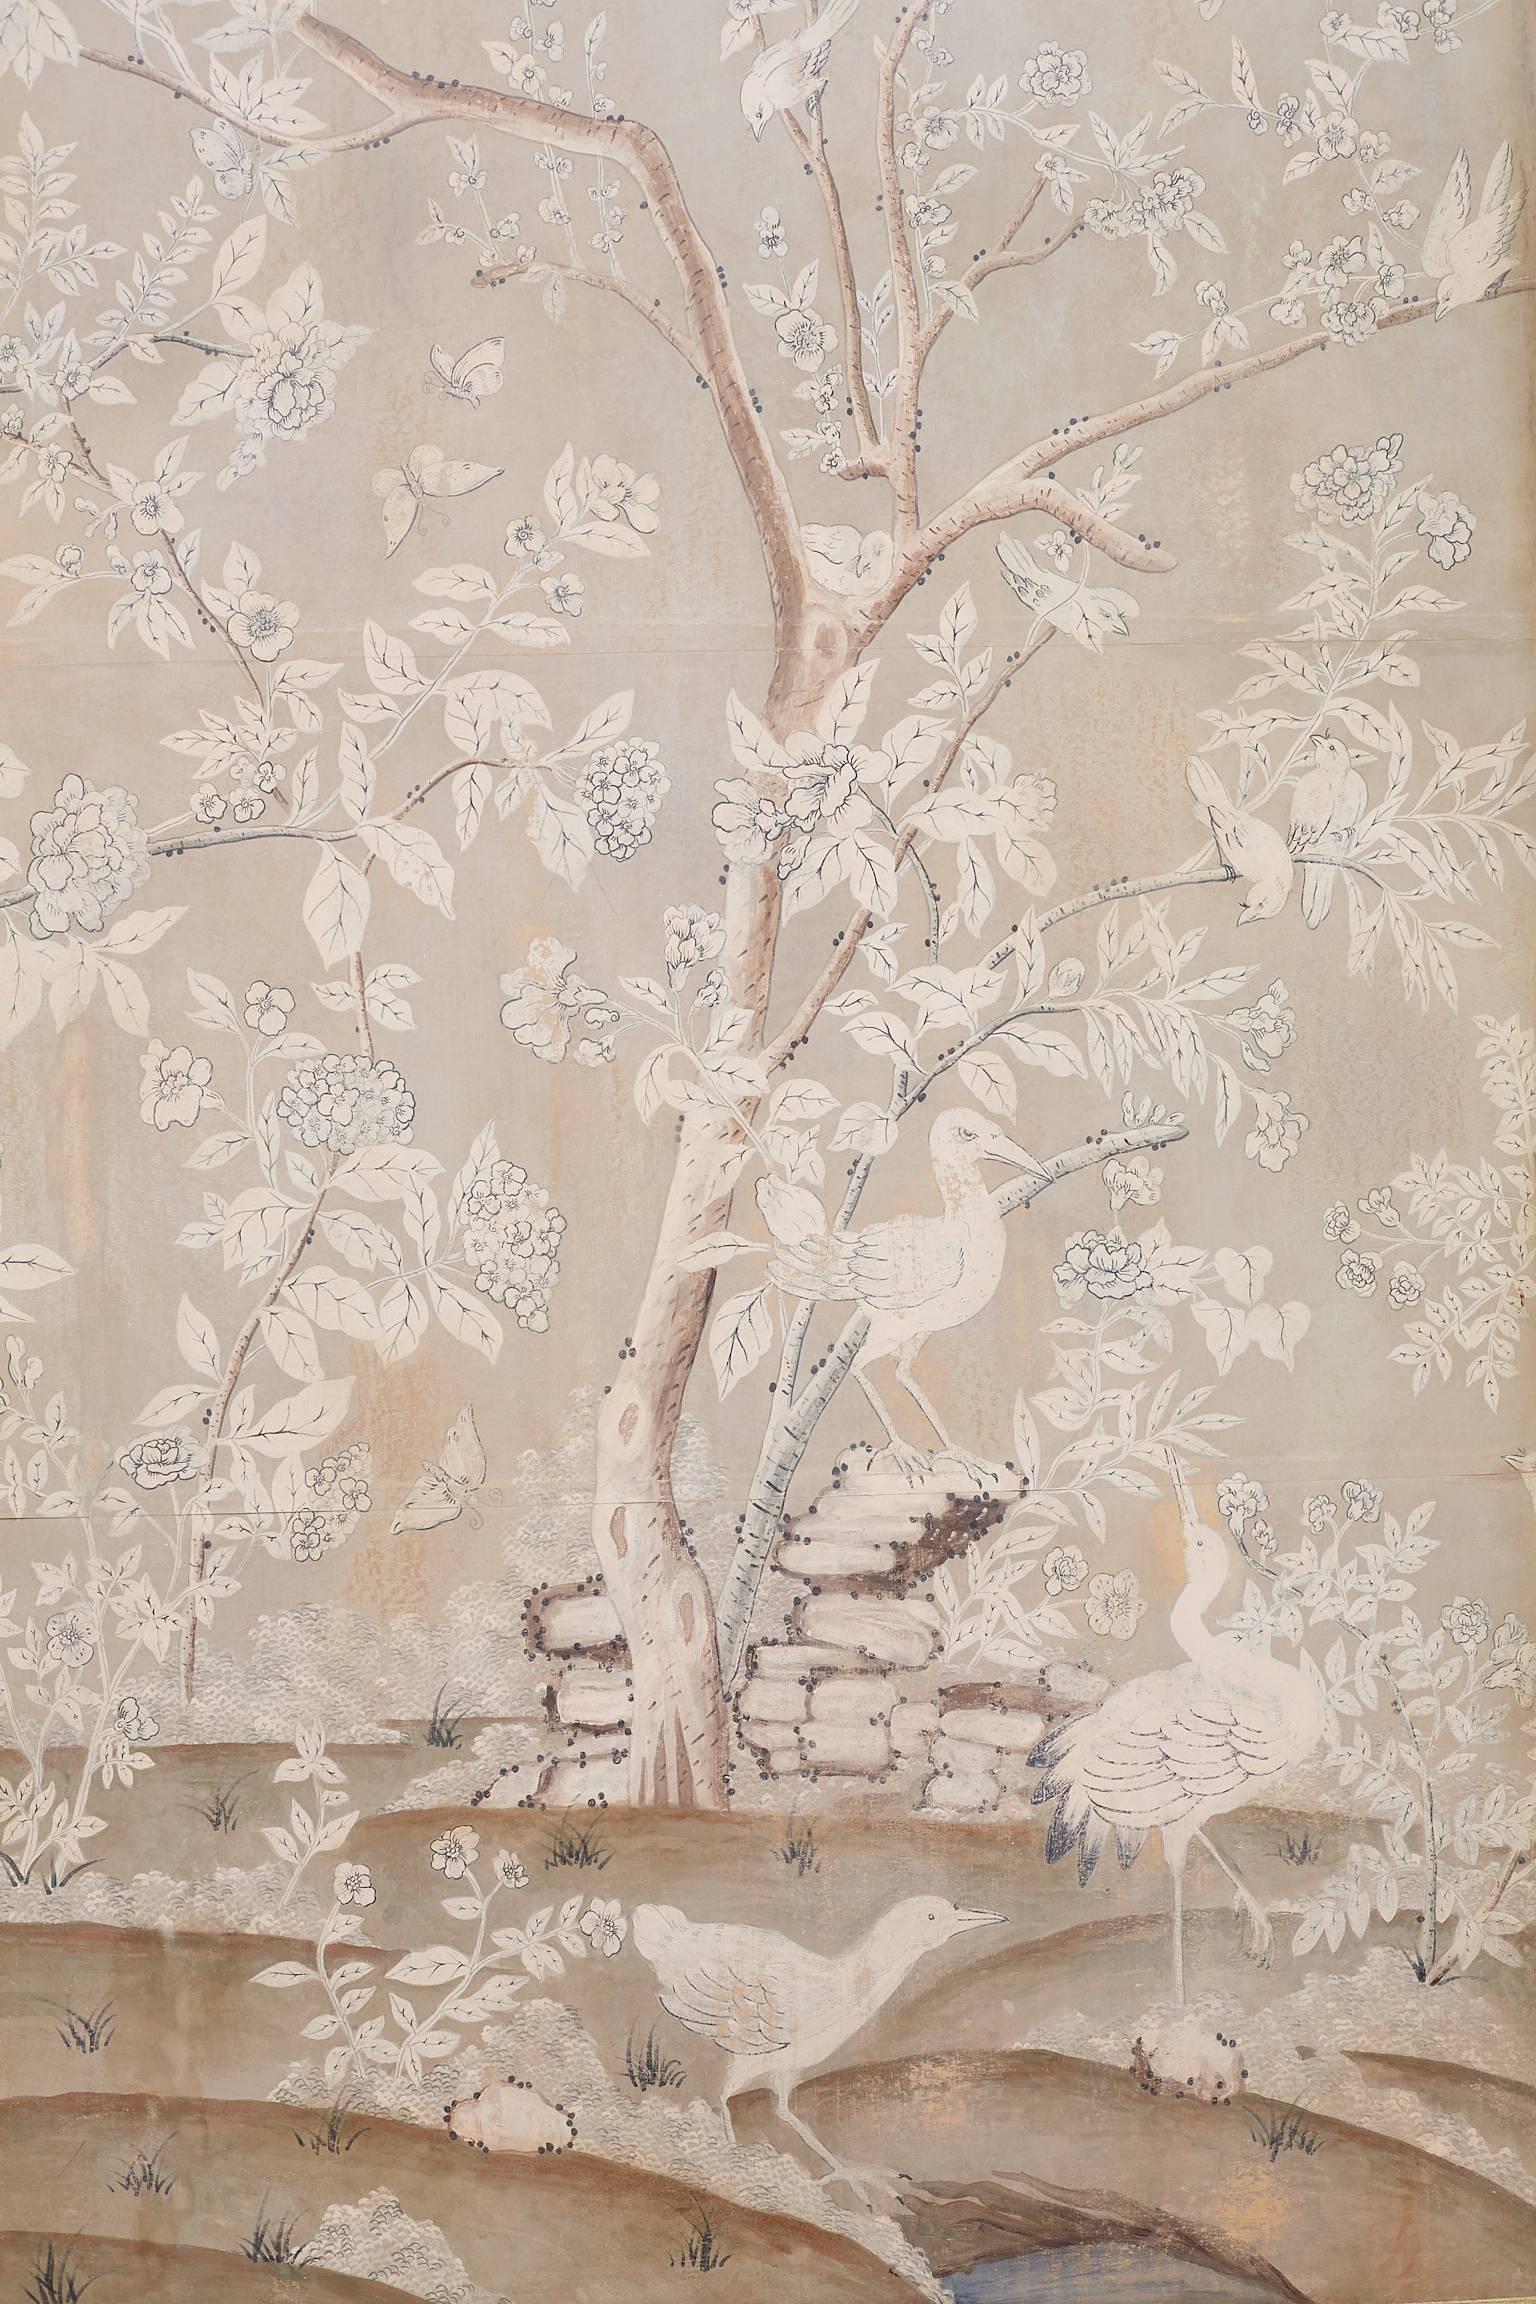 Chinese Monumental Chinoiserie Wallpaper Panels by Dennis and Leen